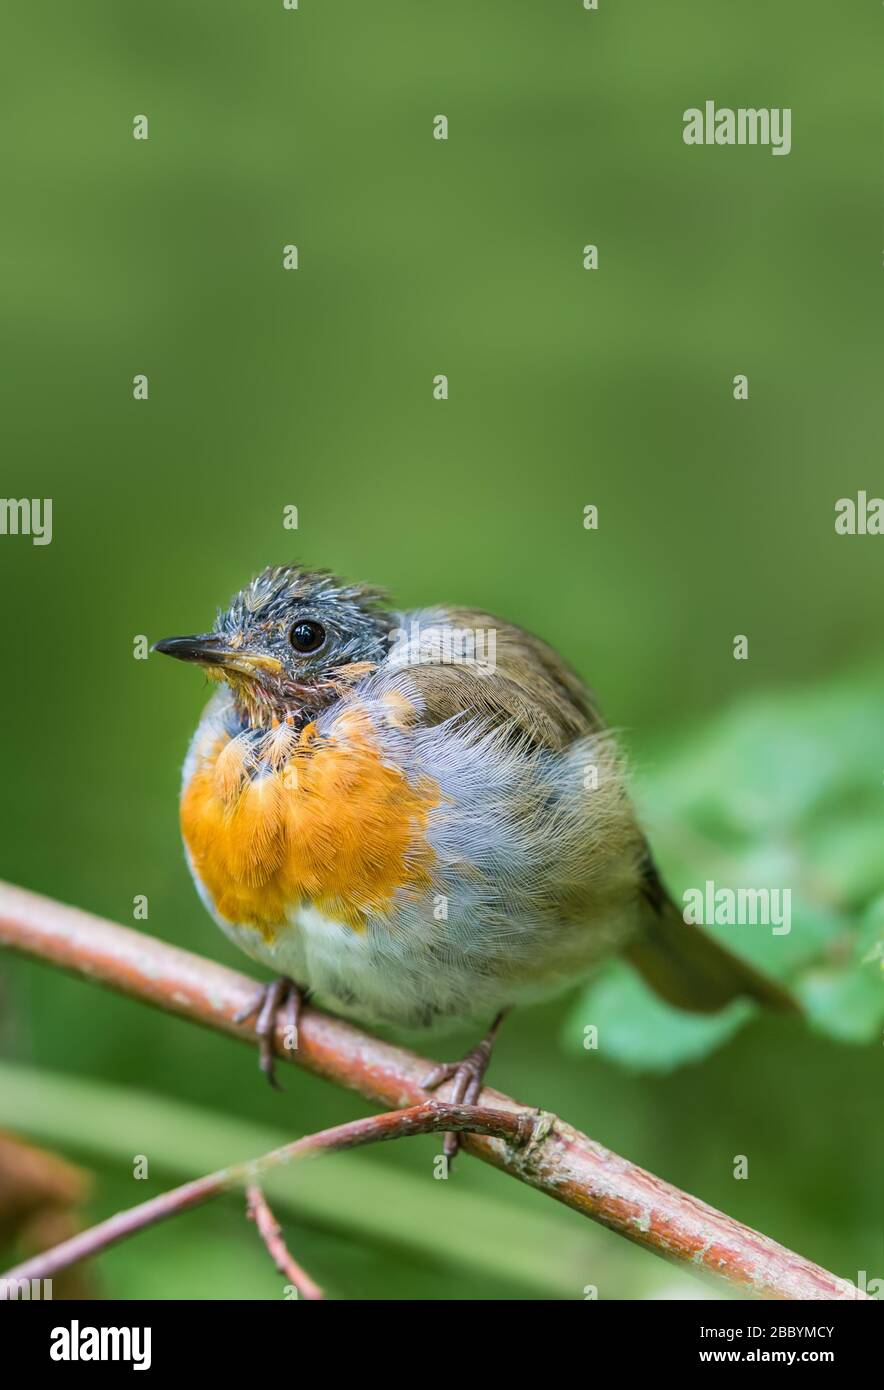 Robin (Erithacus rubecula) in moult, perched on a twig in Summer in West Sussex, UK. Robin moulting, losing feathers. Portrait Copy space. Copyspace. Stock Photo